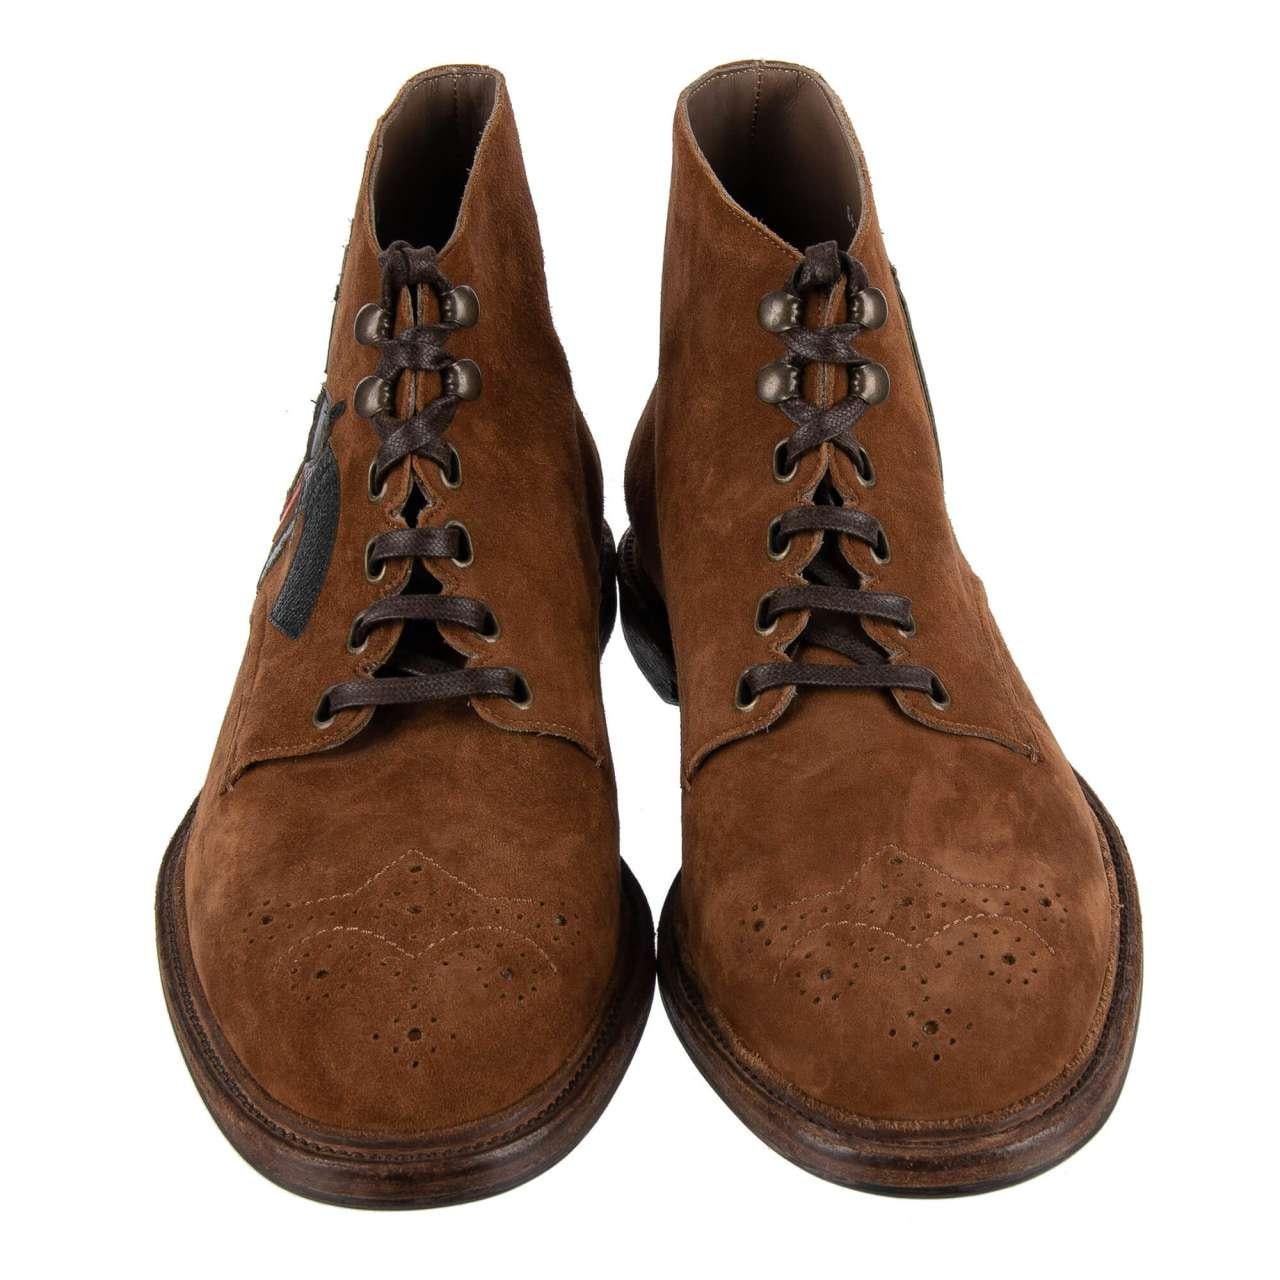 Men's Dolce & Gabbana Suede Brogue Boots with Pistols Embroidery MARSALA Brown EUR 40 For Sale